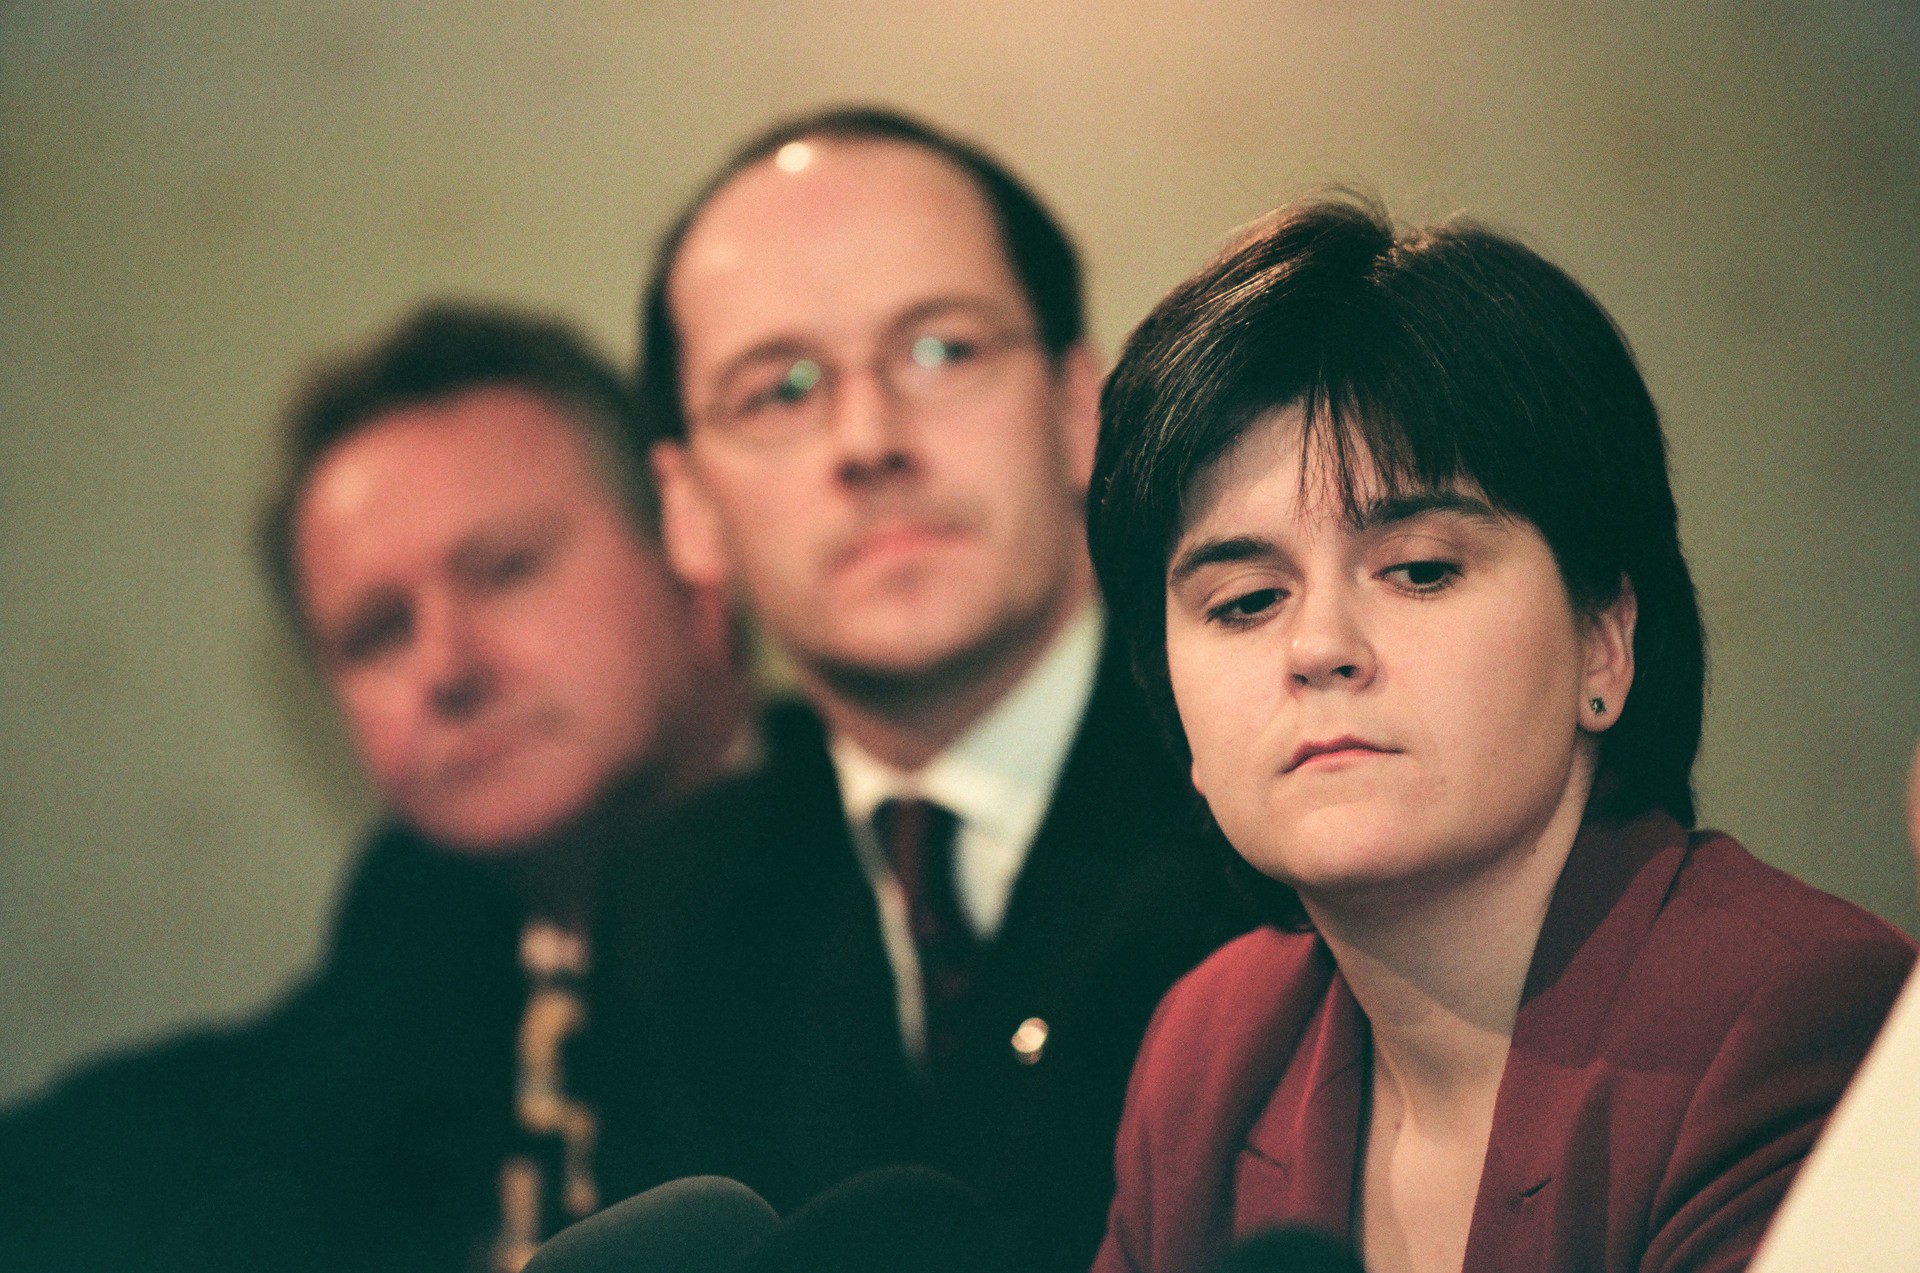 The Scottish National Party's Nicola Sturgeon (right) with John Swinney behind her listening to party leader Alex Salmond addressing the media at the launch of the SNP's 1999 manifesto for the Holyrood election campaign.